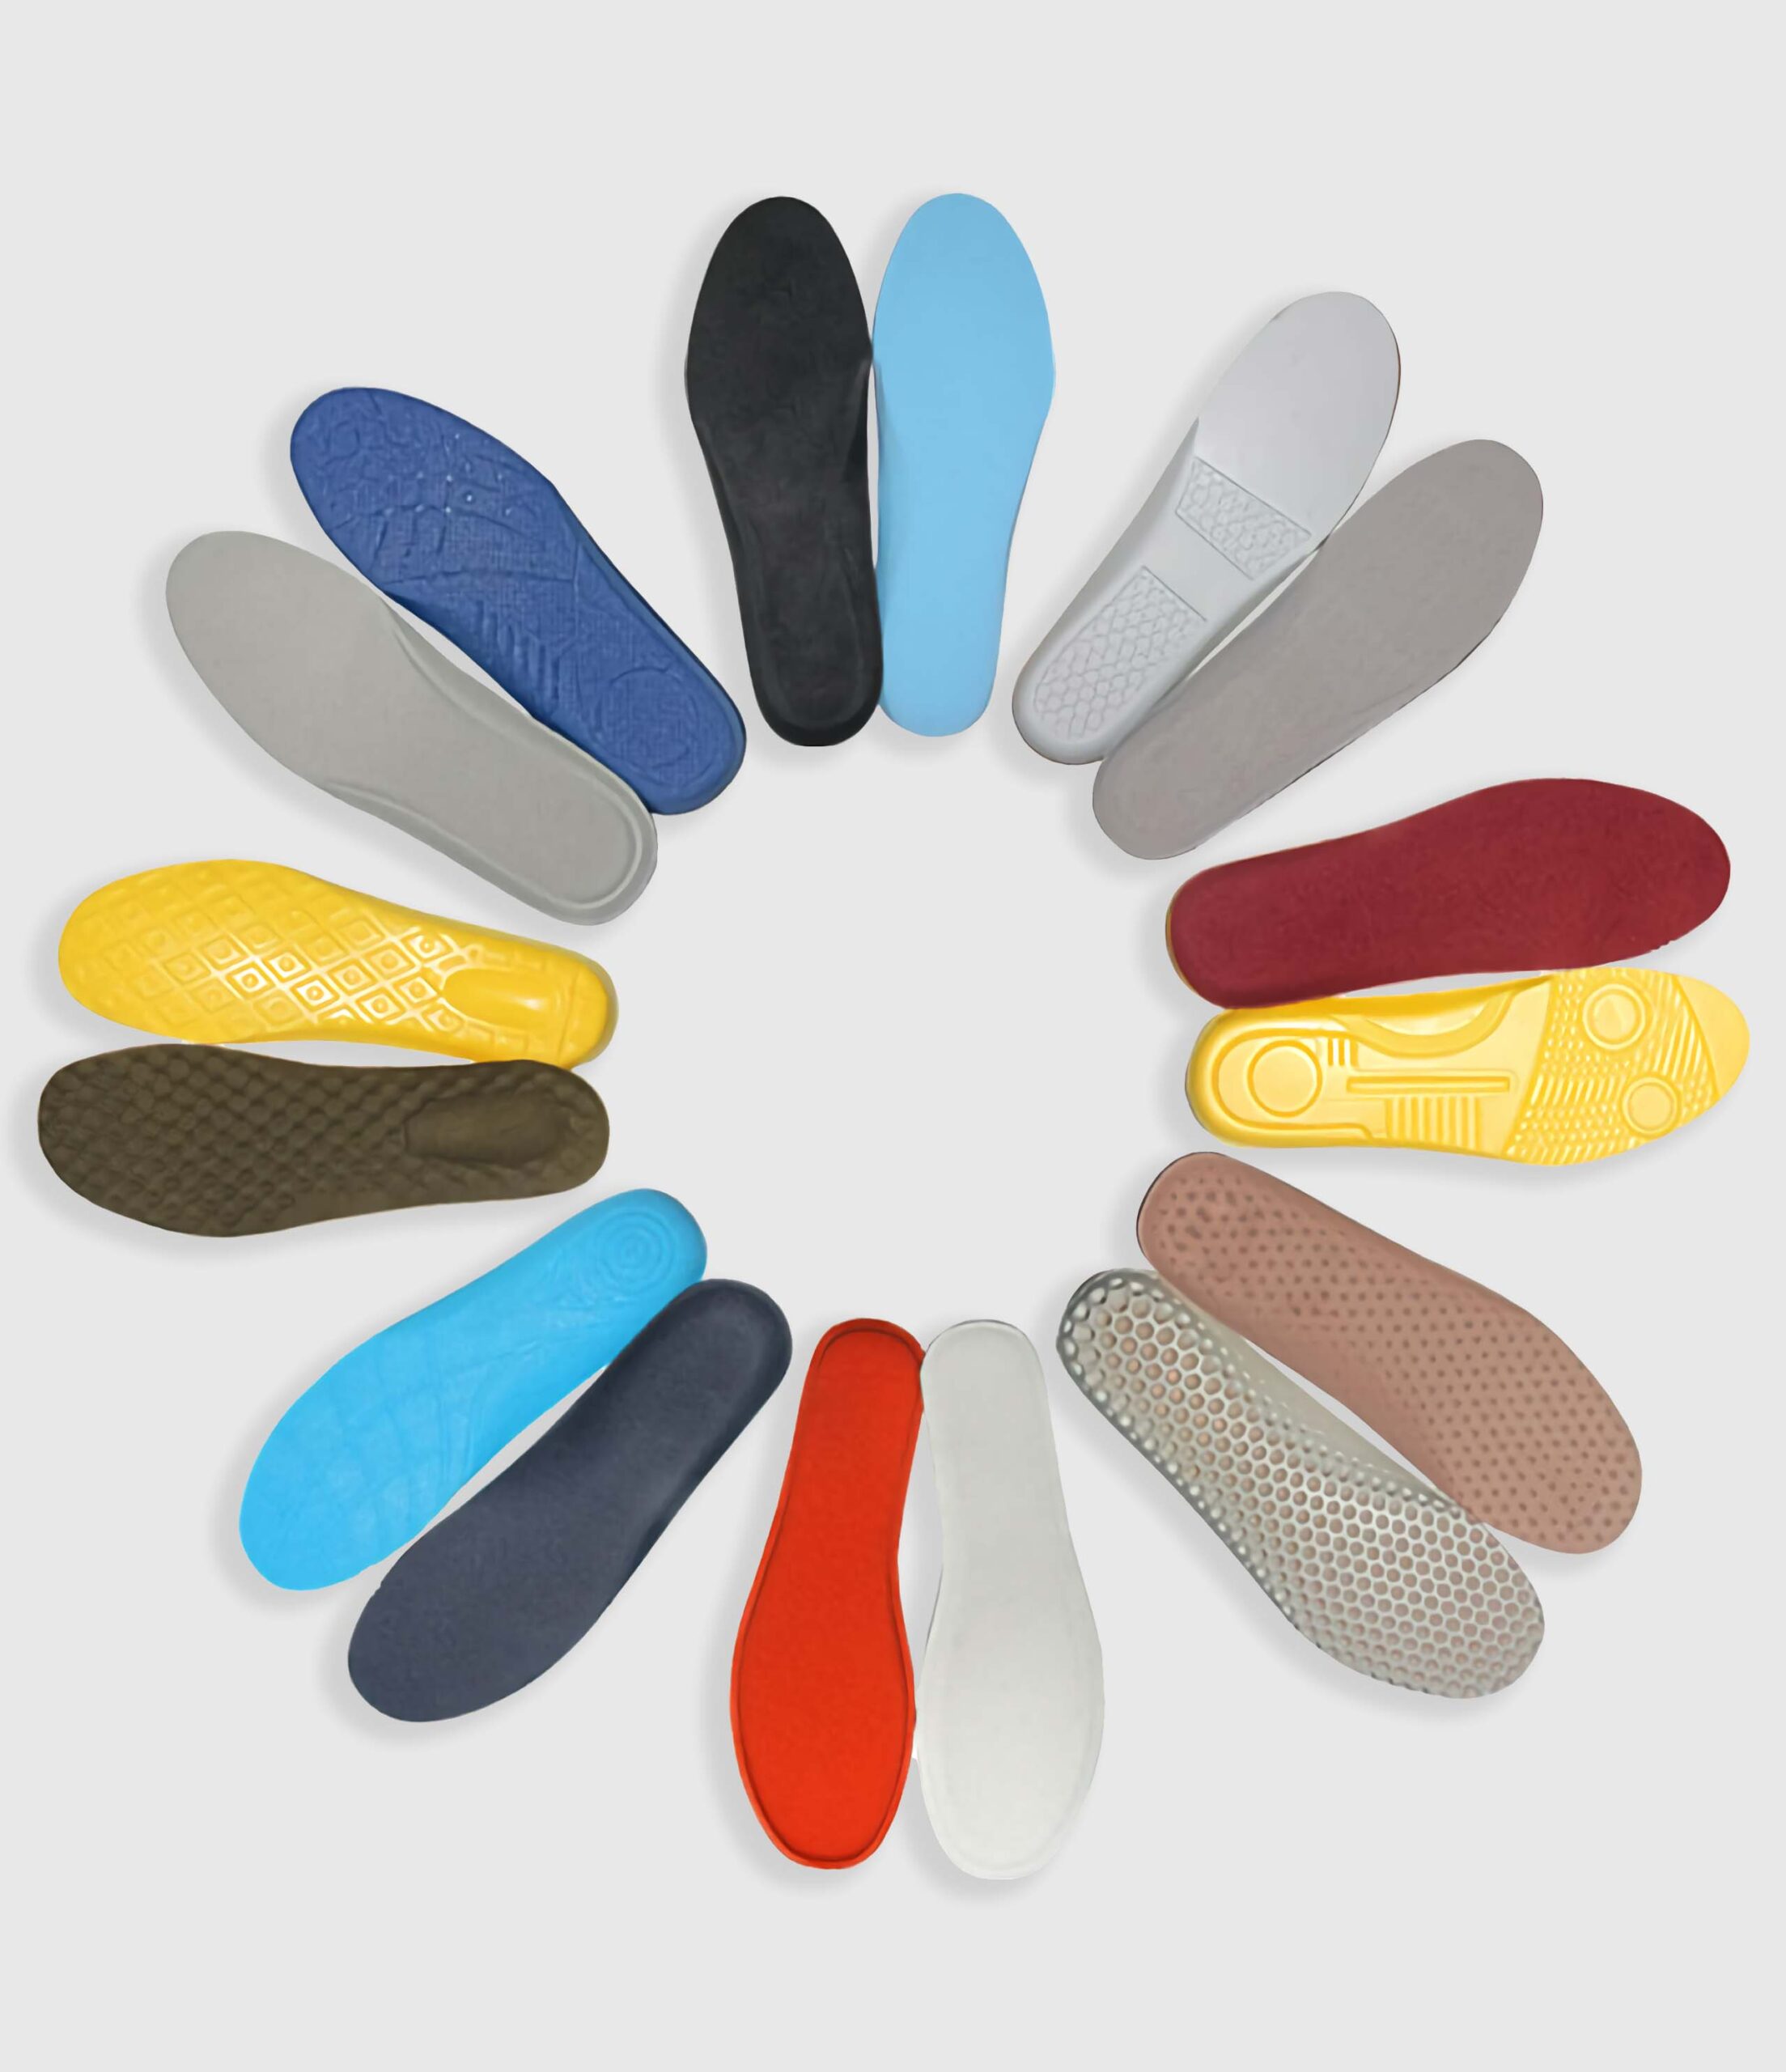 Clarco shoes insoles